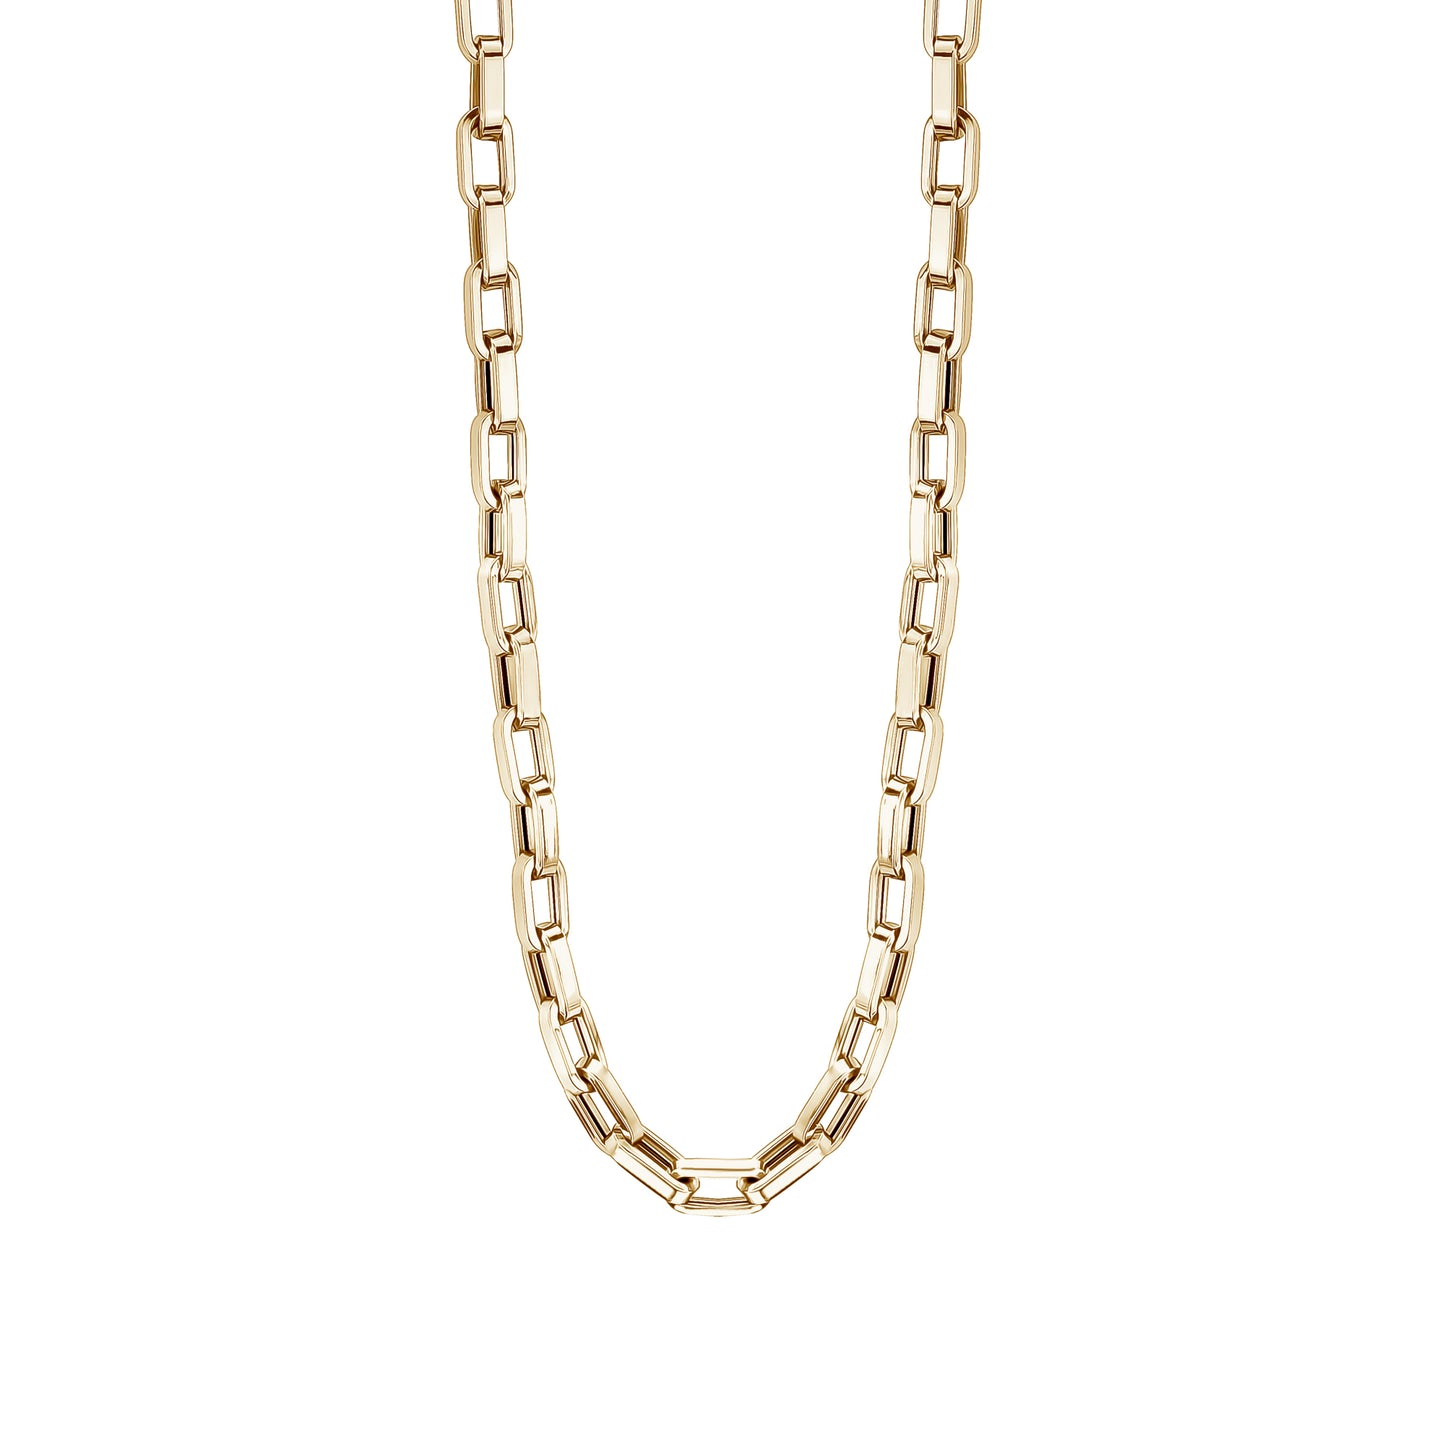 Square Link Necklace